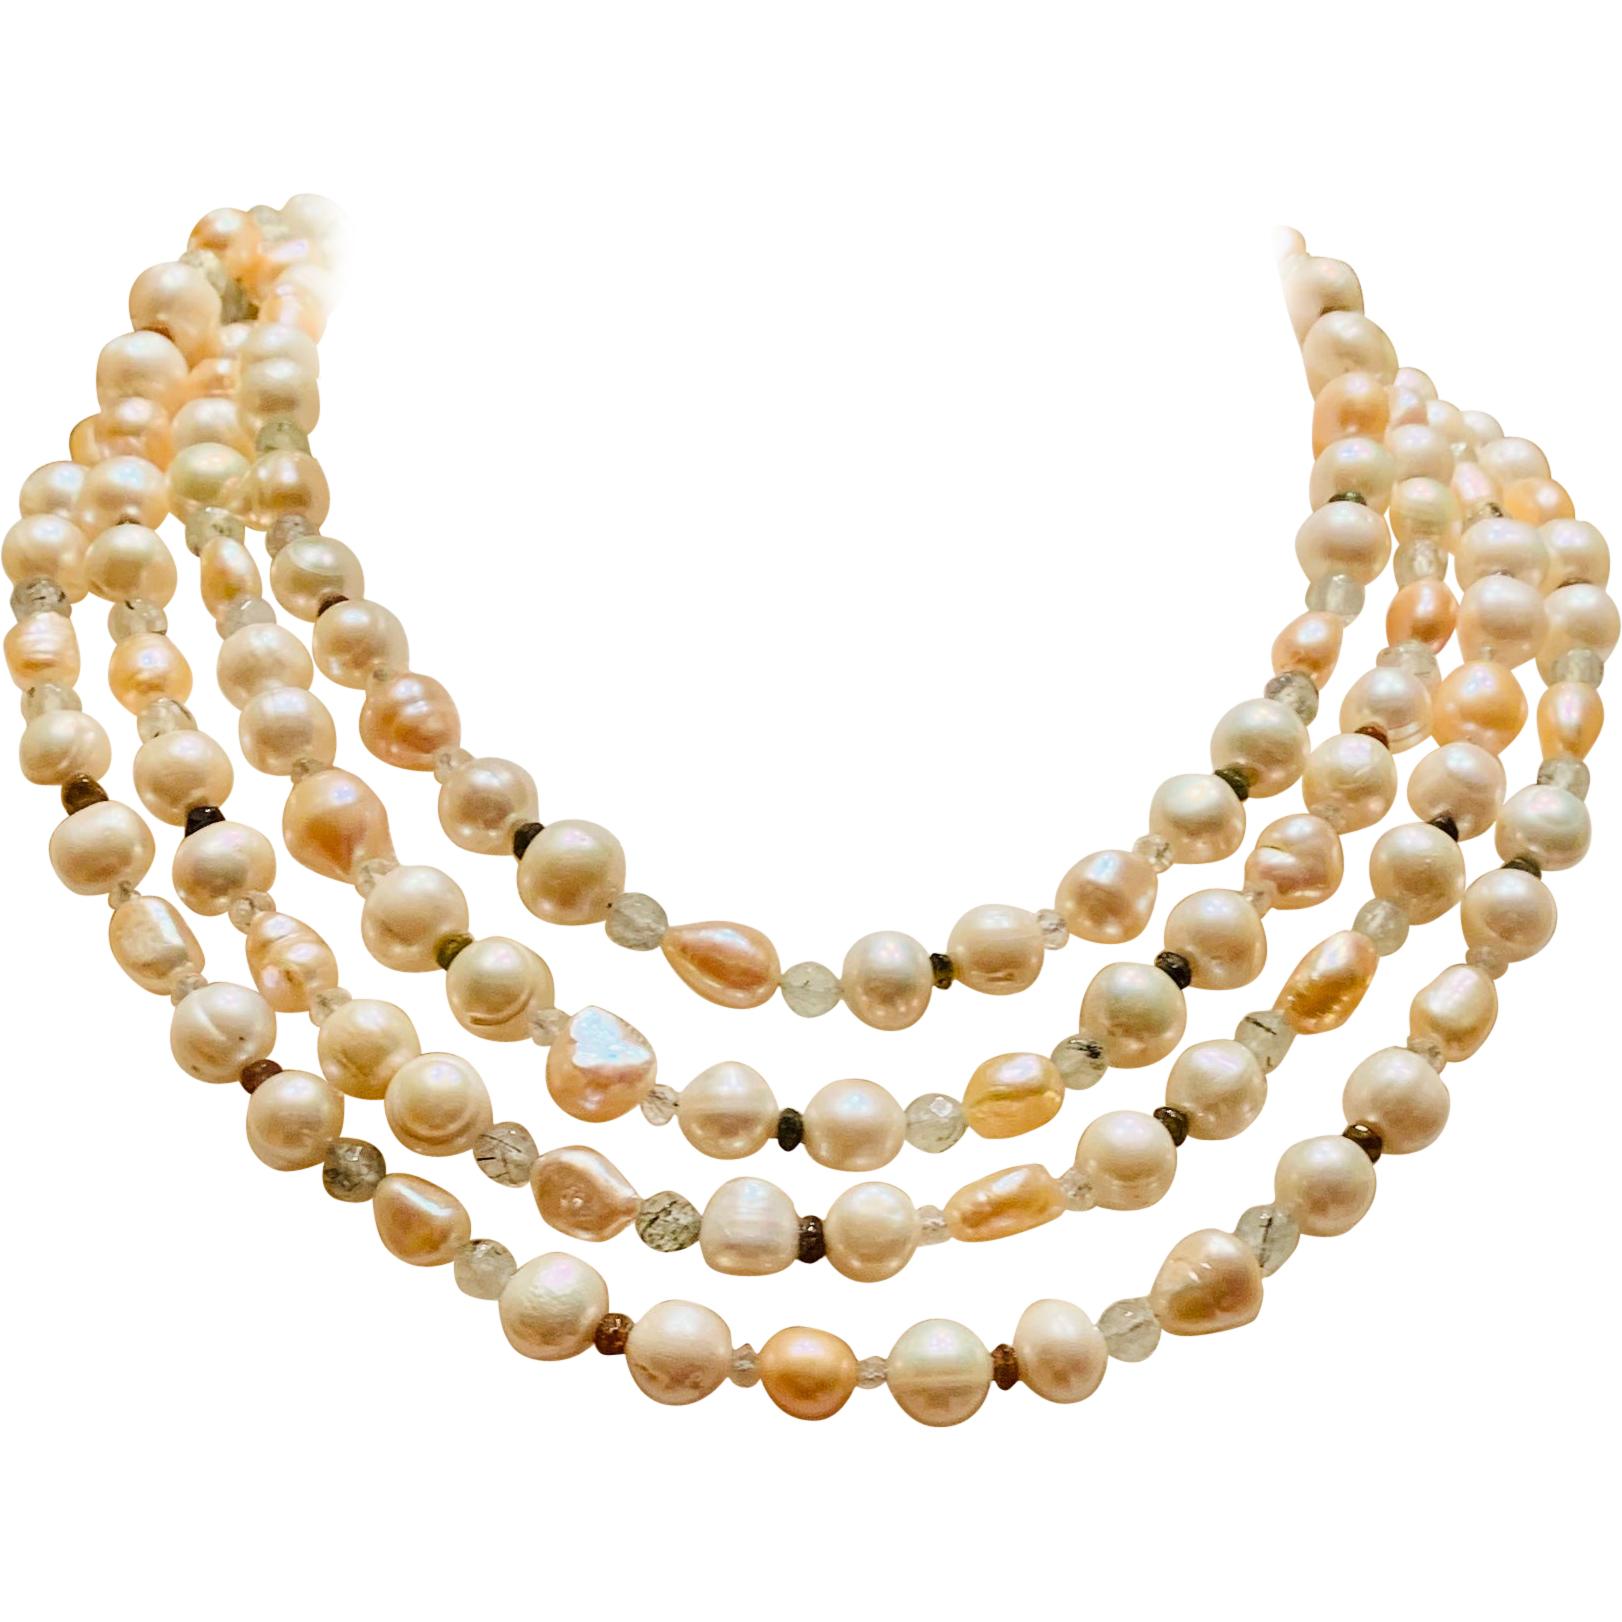 82" Long Pink and White Freshwater Pearl Necklace with Tourmaline and Moonstone For Sale